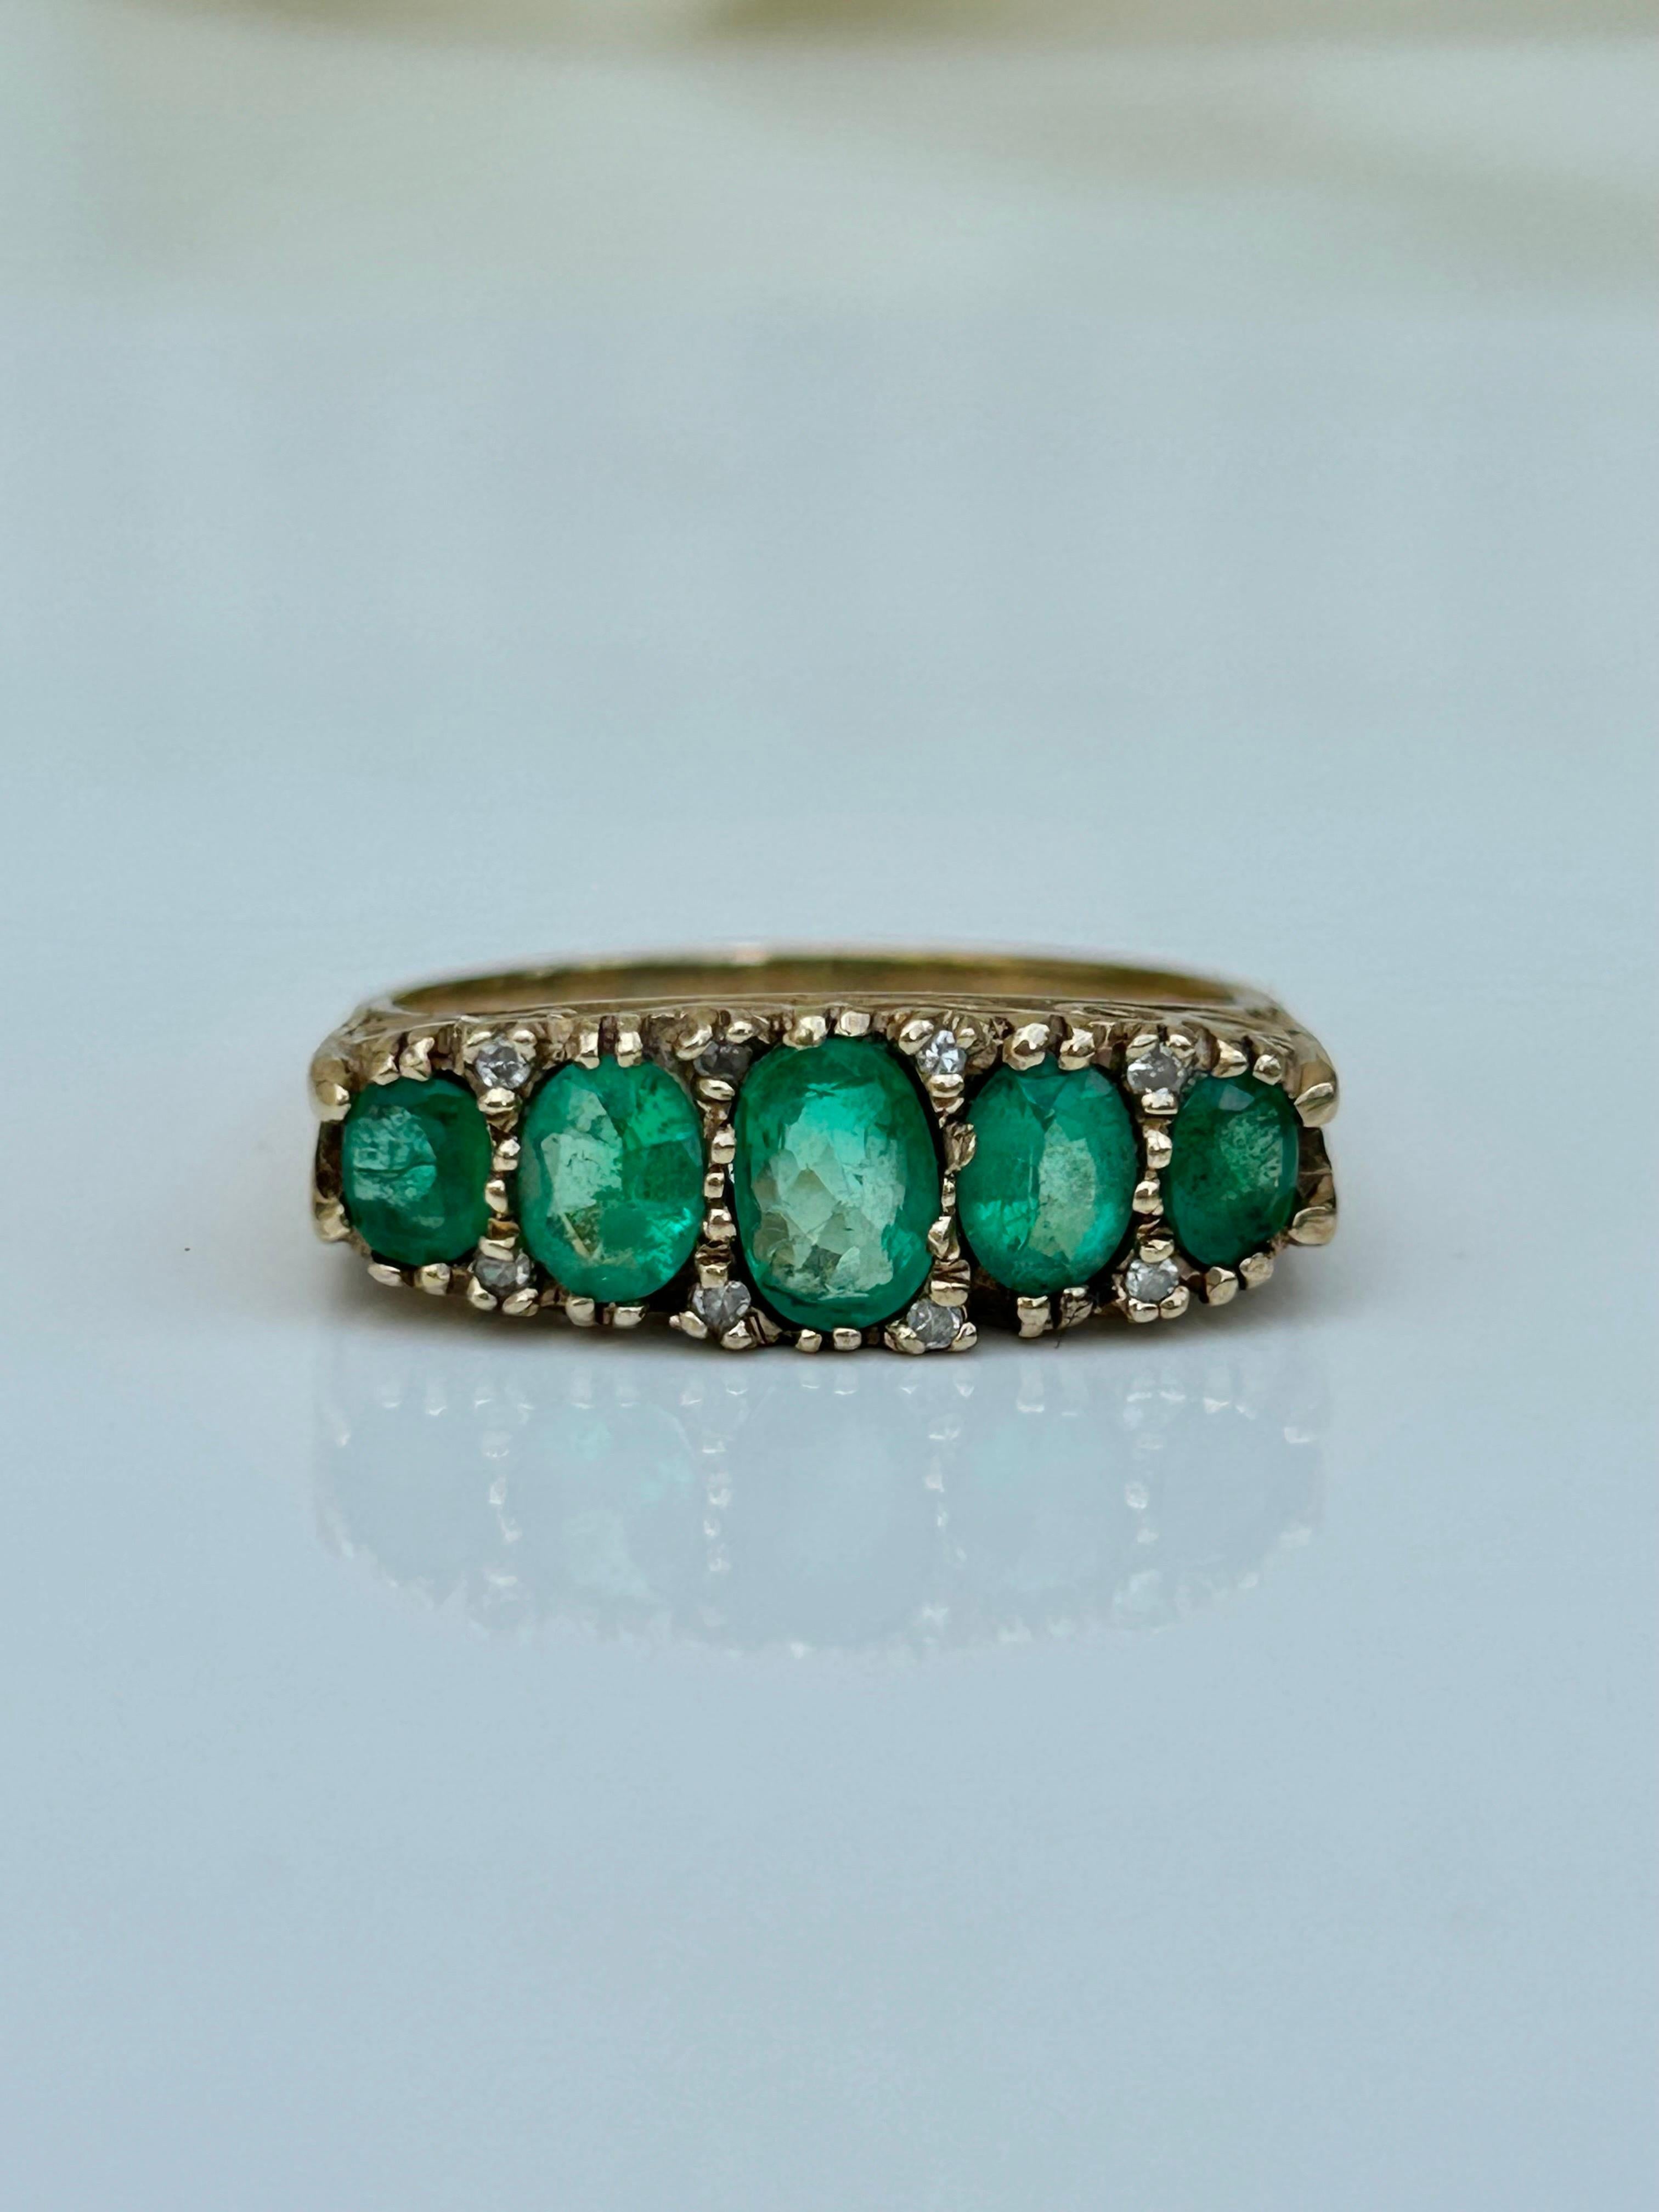 PreLoved Yellow Gold Emerald and Diamond 5 Stone Ring 

5 gorgeous chunky emeralds with diamond points and a lovely scroll

The item comes without the box in the photo but will be presented in a Howard’s Antique gift book

Measurements: weight